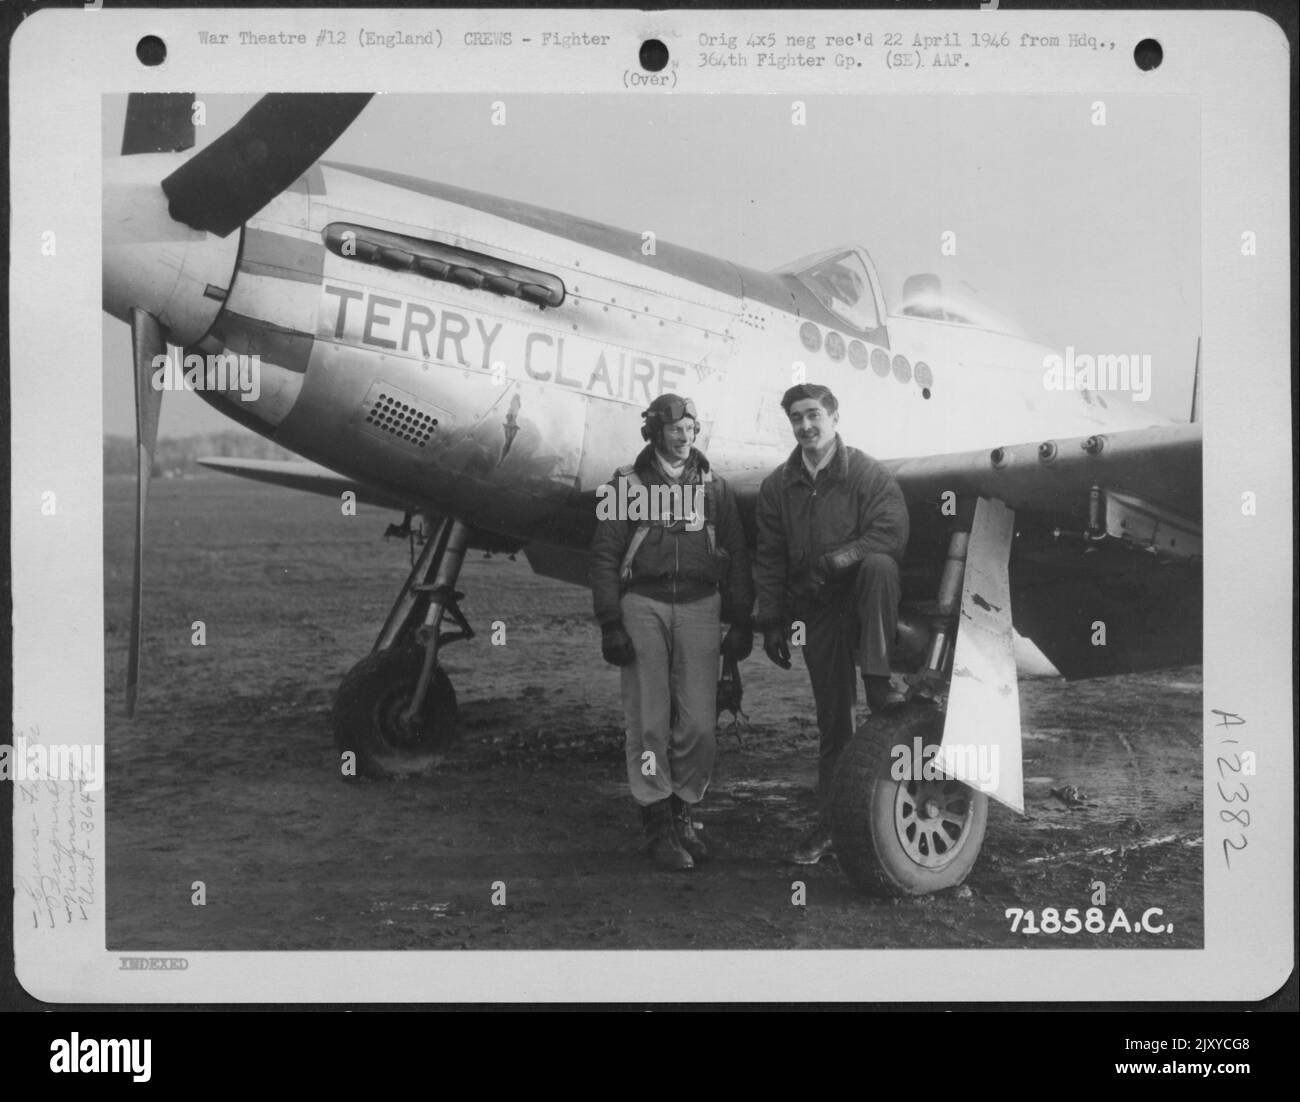 Lt. Fowle, Pilot, Talks To His Crew Chief As They Stand Beside The North American P-51 'Terry Claire Iii' Of The 364Th Fighter Group, 67Th Fighter Wing, At 8Th Air Force Station F-375, Honnington, England. 31 December 1944. Stock Photo